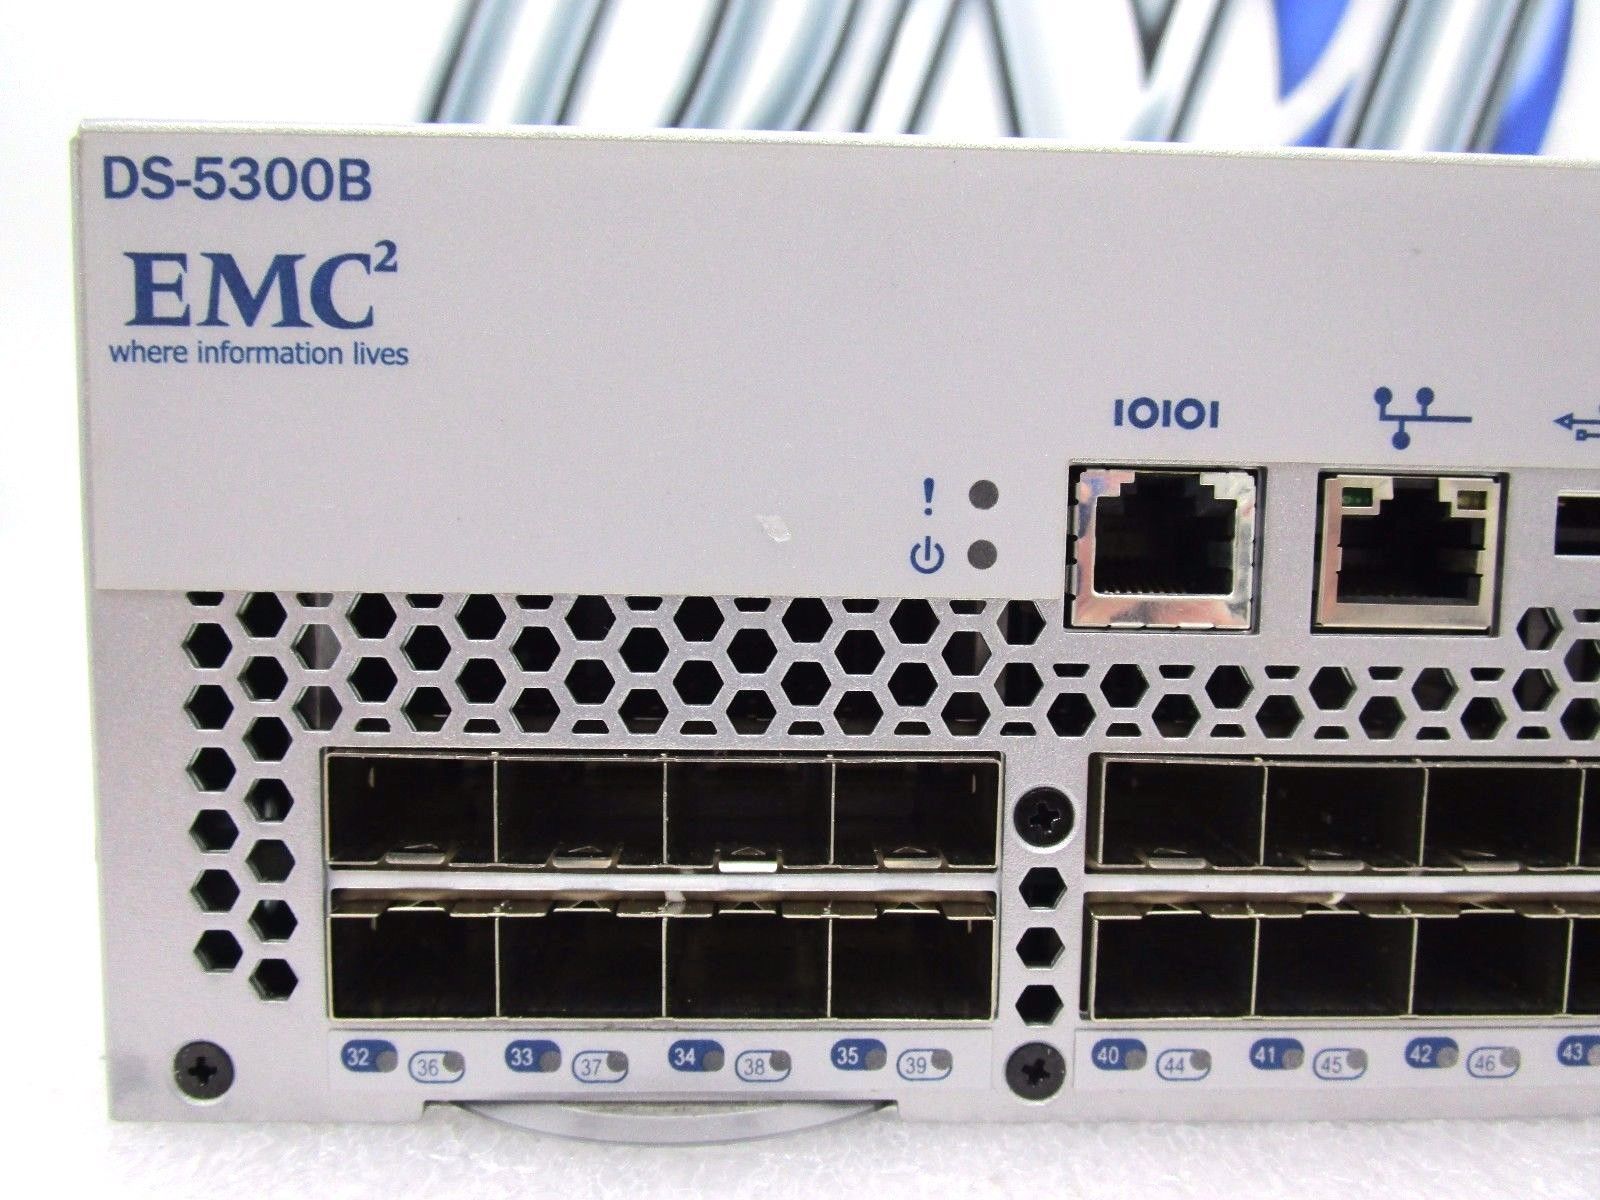 How to get a Brocade switch configured for Dell EMC SRS (ESRS) - 50mu